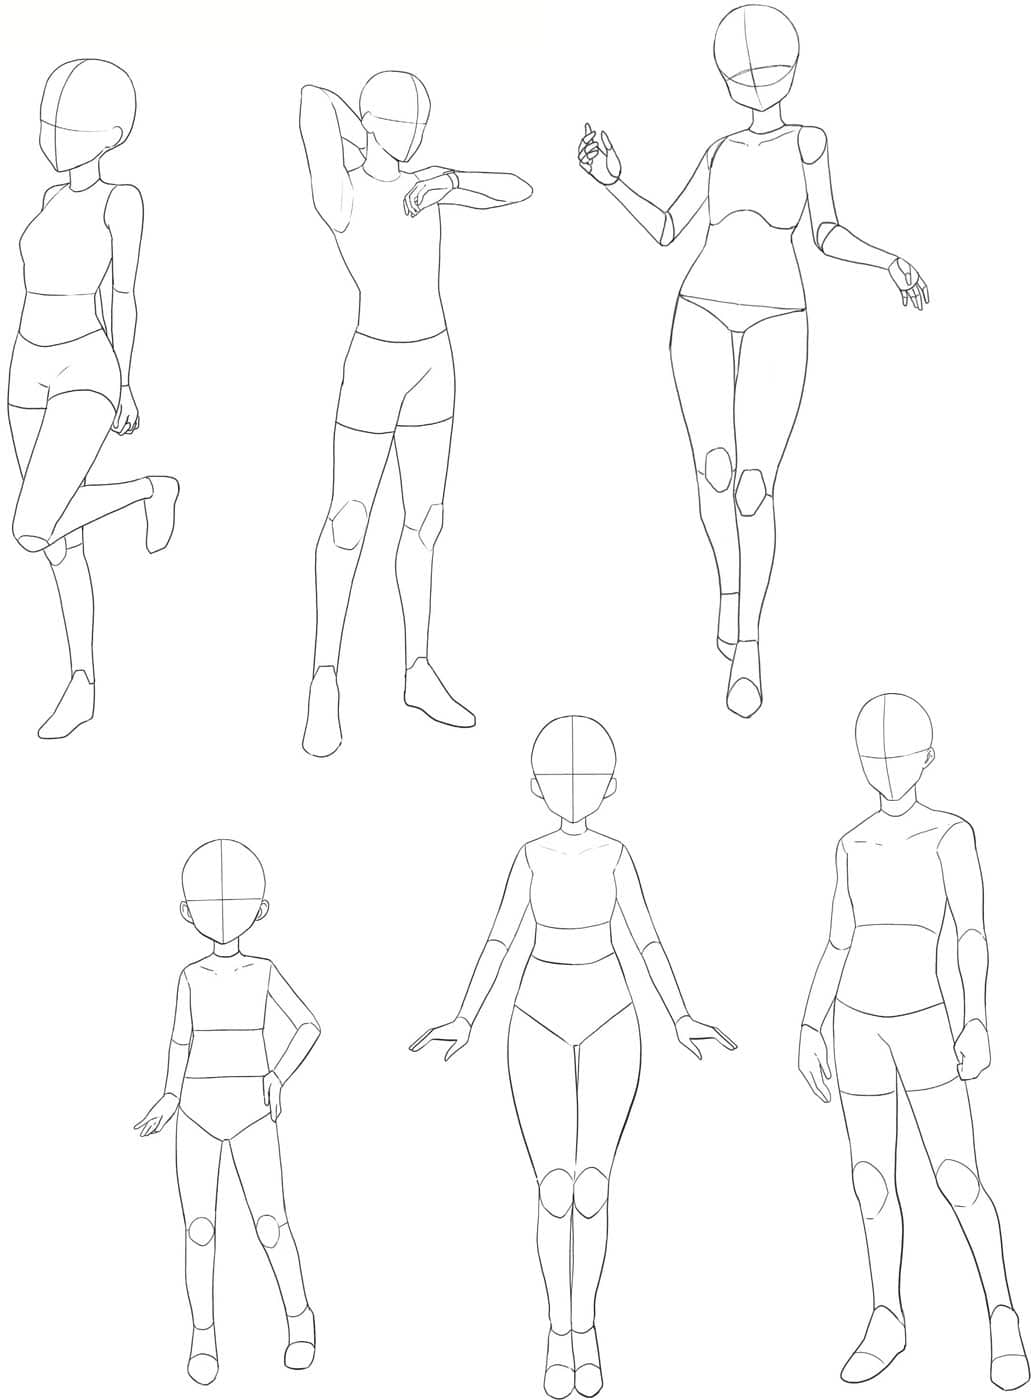 Create meme sketches of anime, anime poses - Pictures , poses de anime